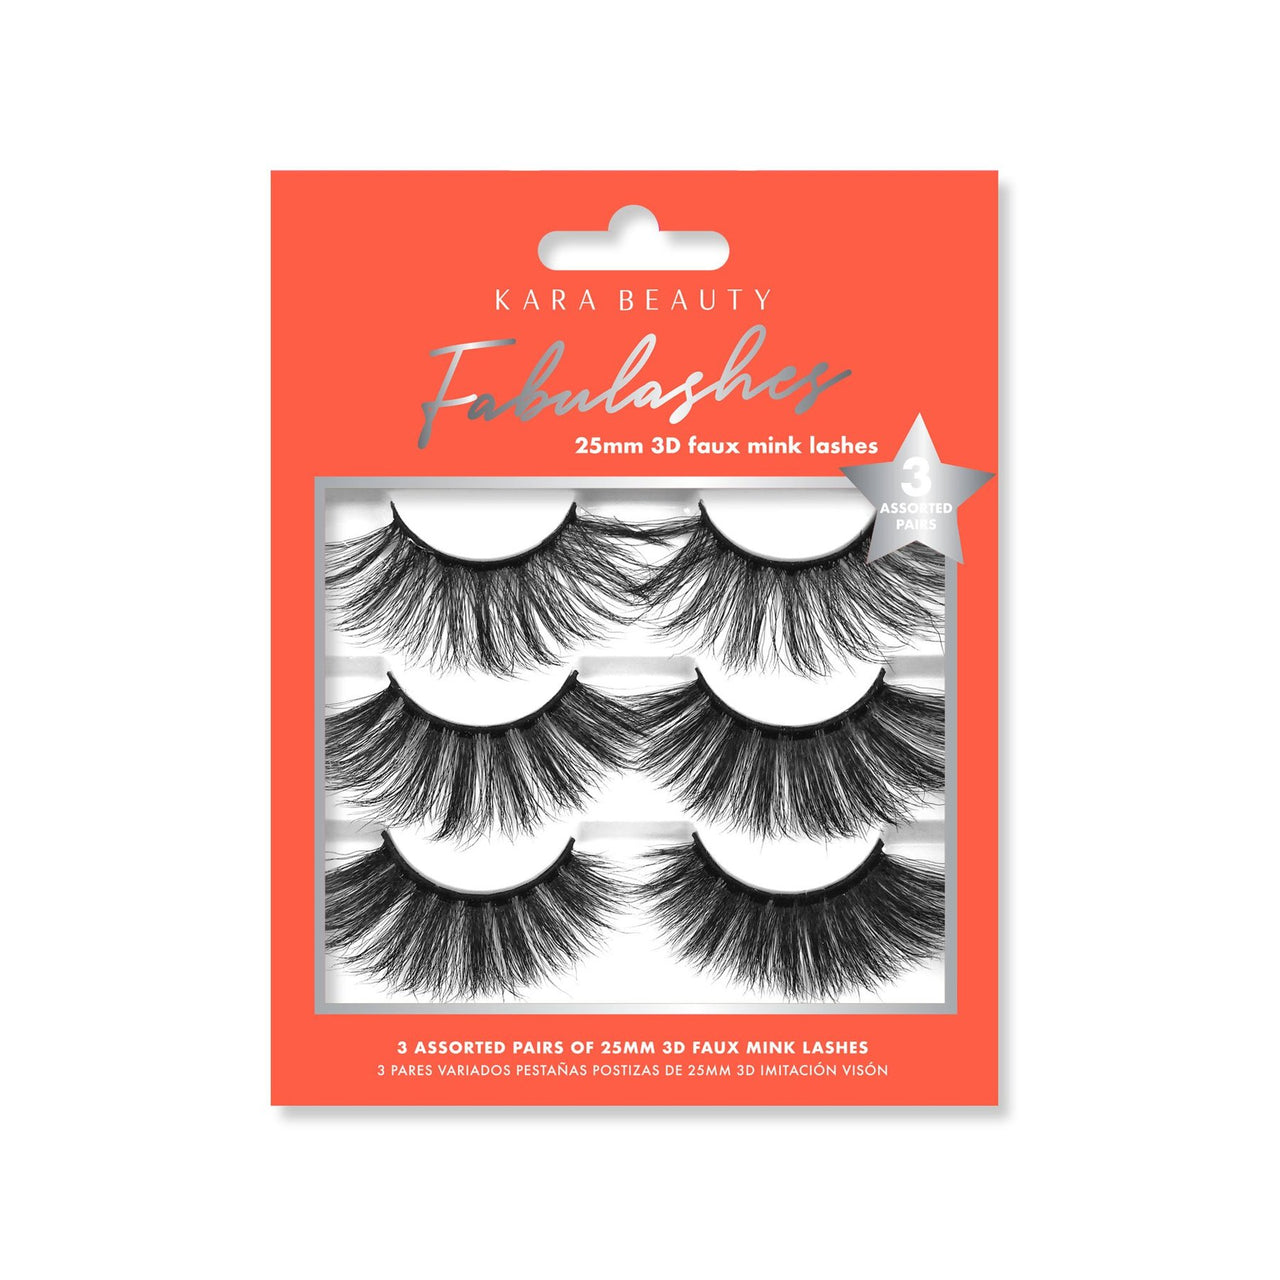 KR-25MM 3D FAUX MINK LASHES 3 ASSORTED PAIRS